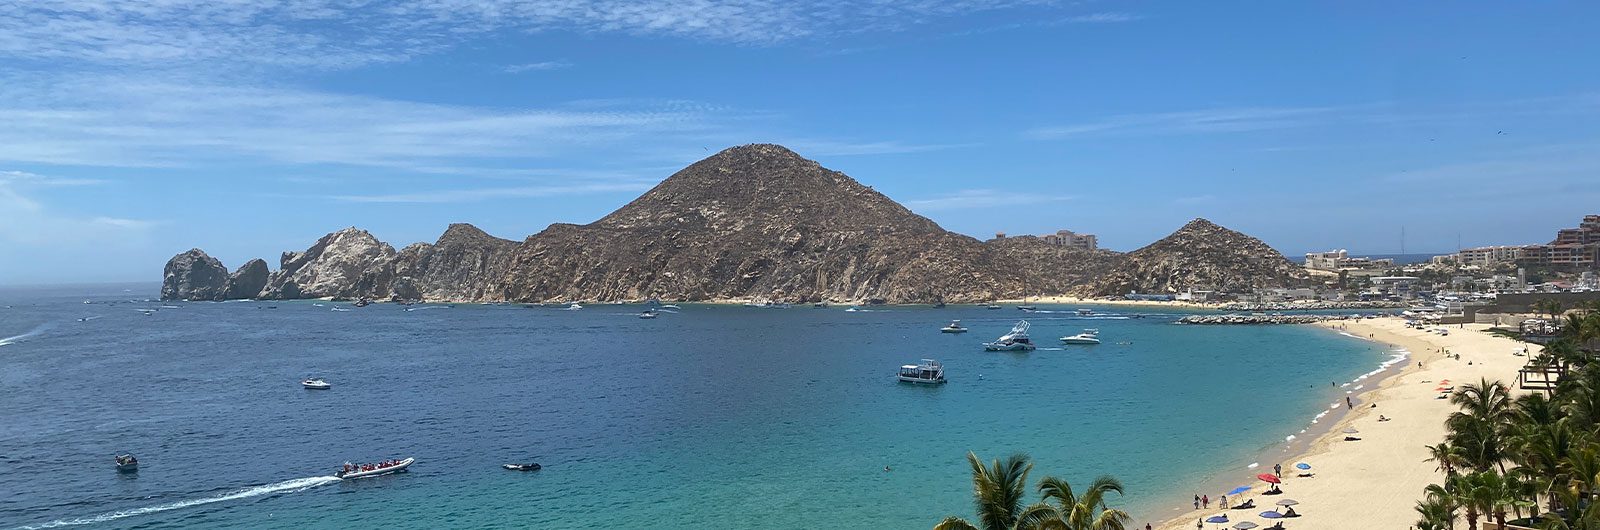 Top 5 Things To Do In Cabo San Lucas